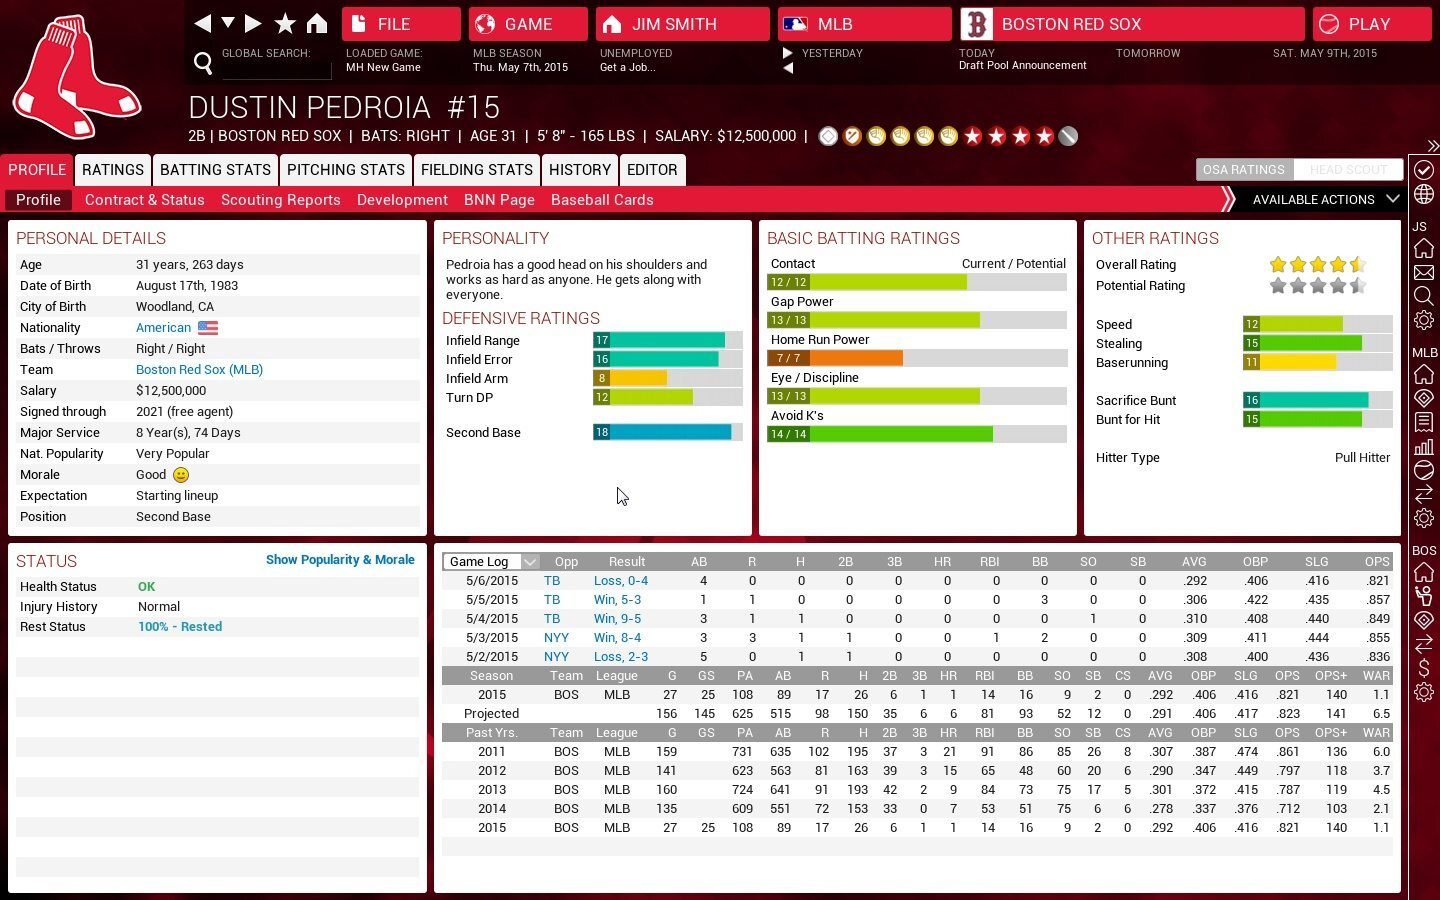 SLG 2014. Gap Power. OOTP Baseball Finances. Contracts statuses. Detail year